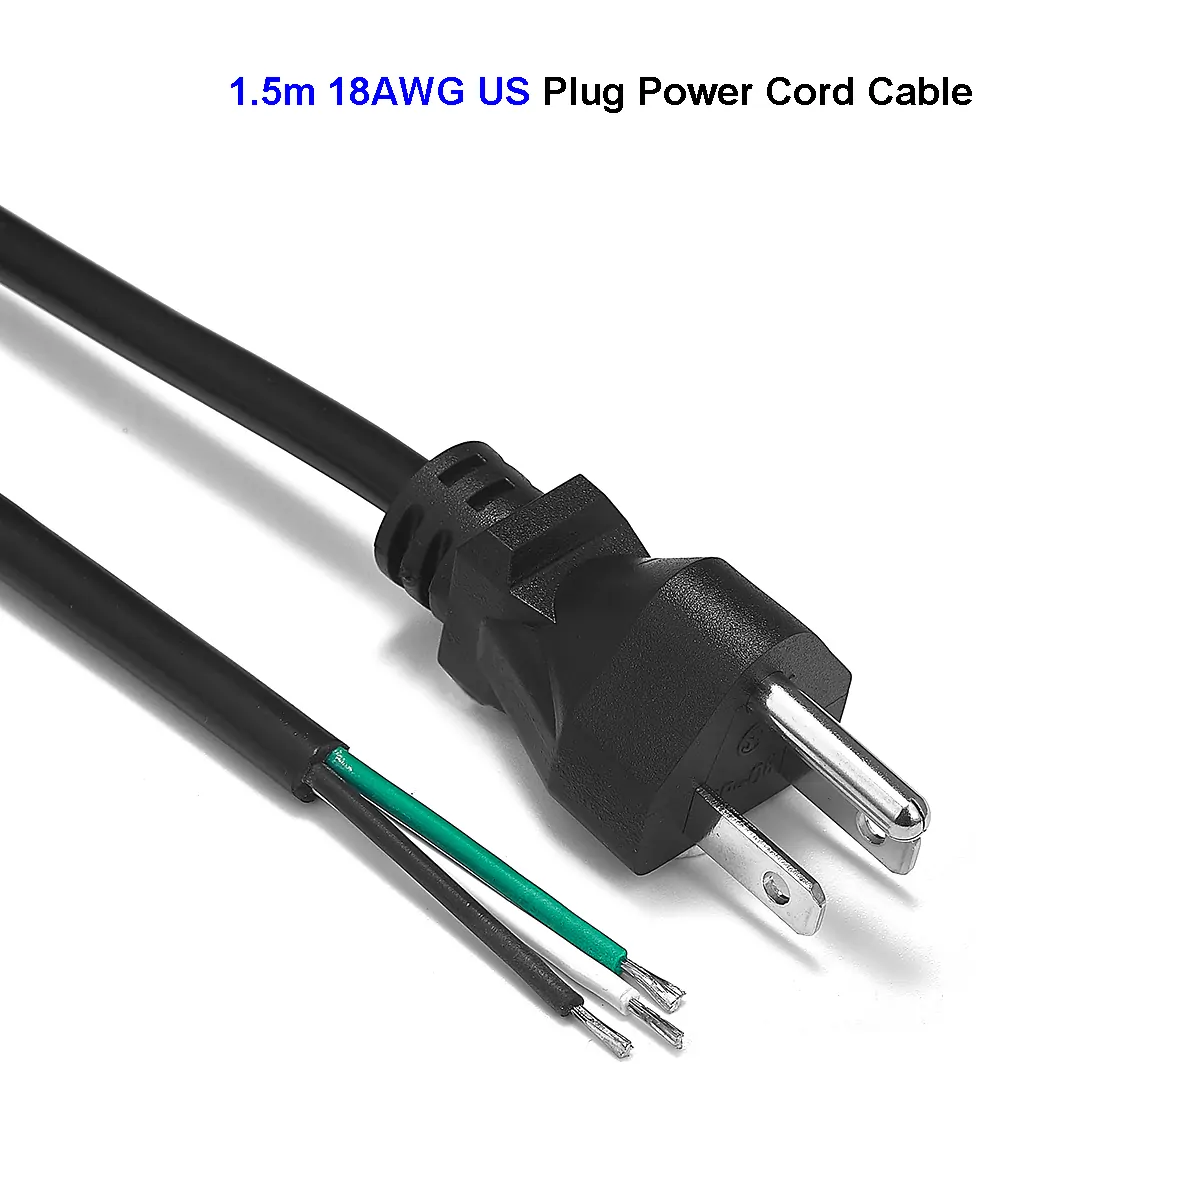 1.5m 18AWG US plug power cord cable